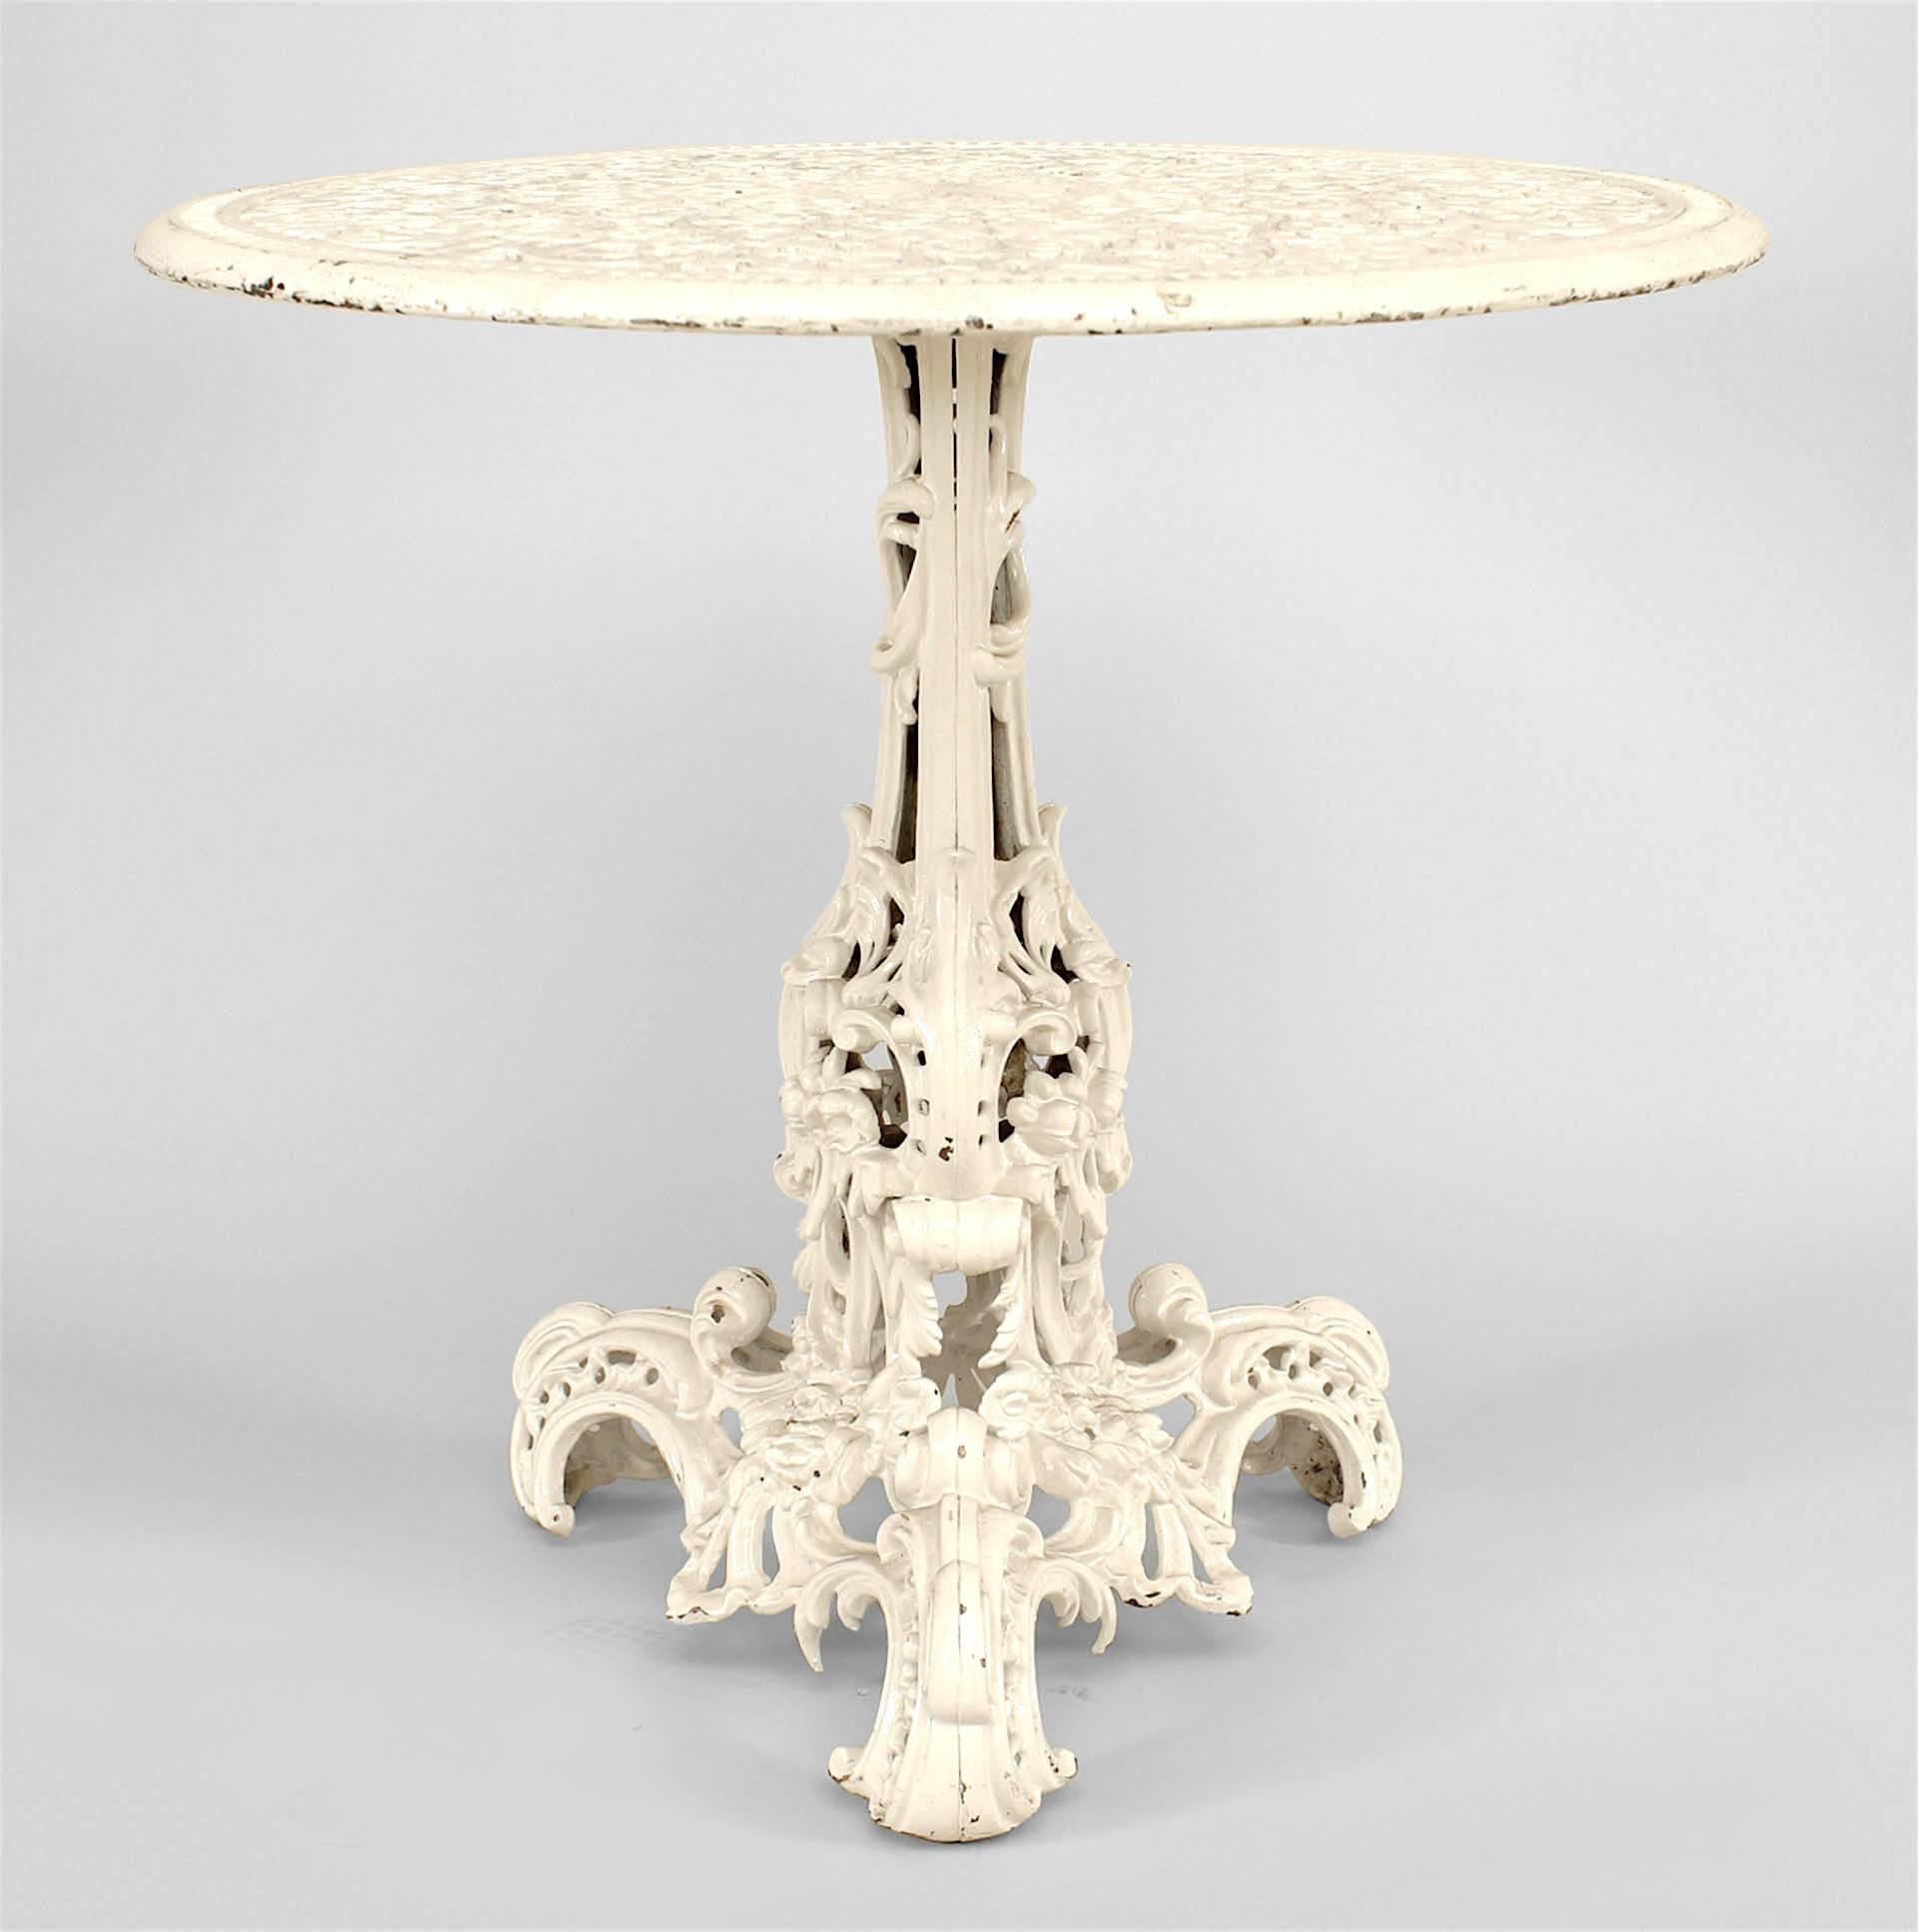 Outdoor American Victorian painted iron round center table with filigree and scroll design top and pedestal base.
